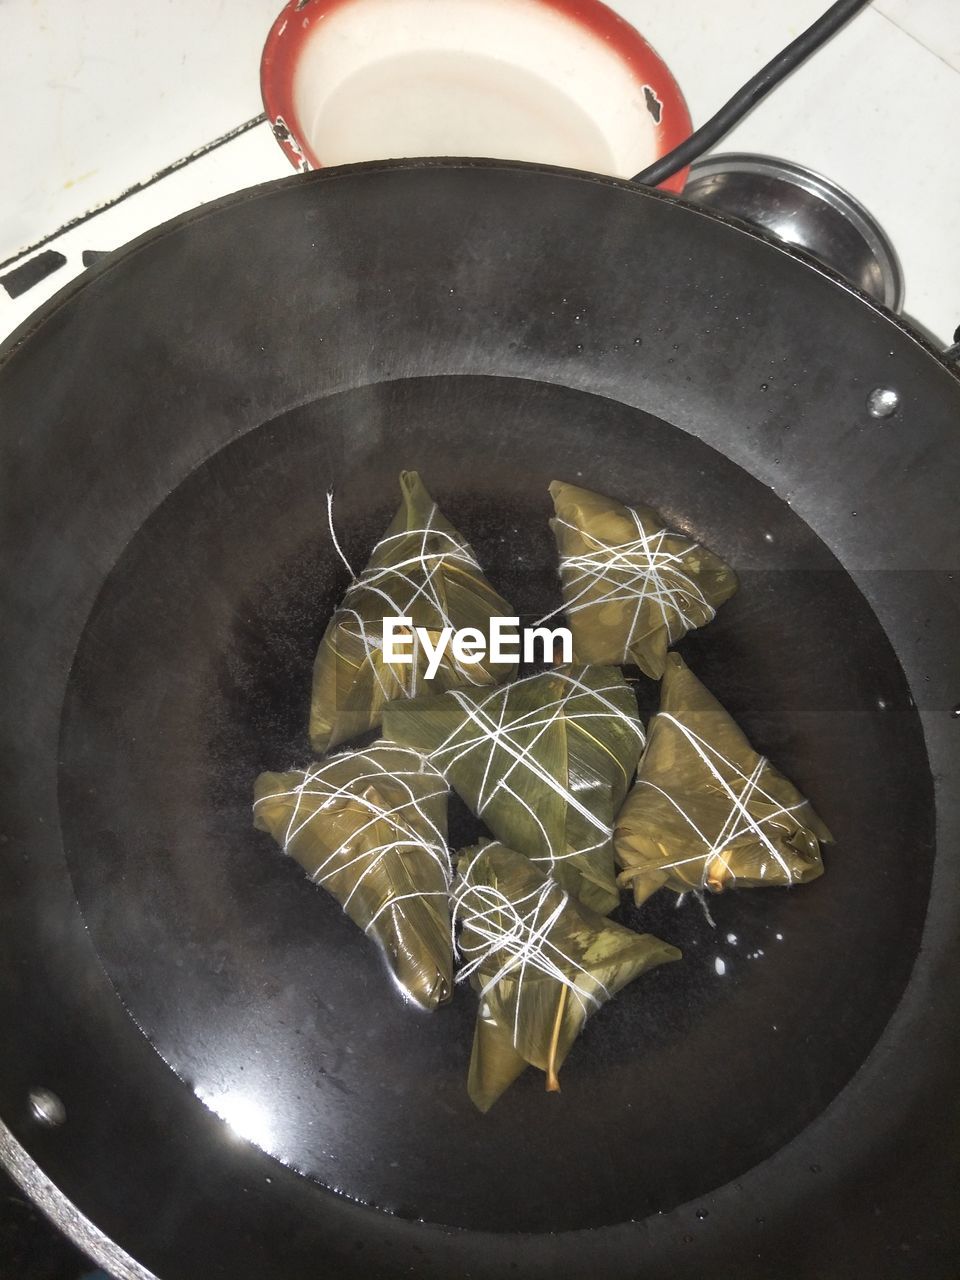 HIGH ANGLE VIEW OF PERSON COOKING IN KITCHEN